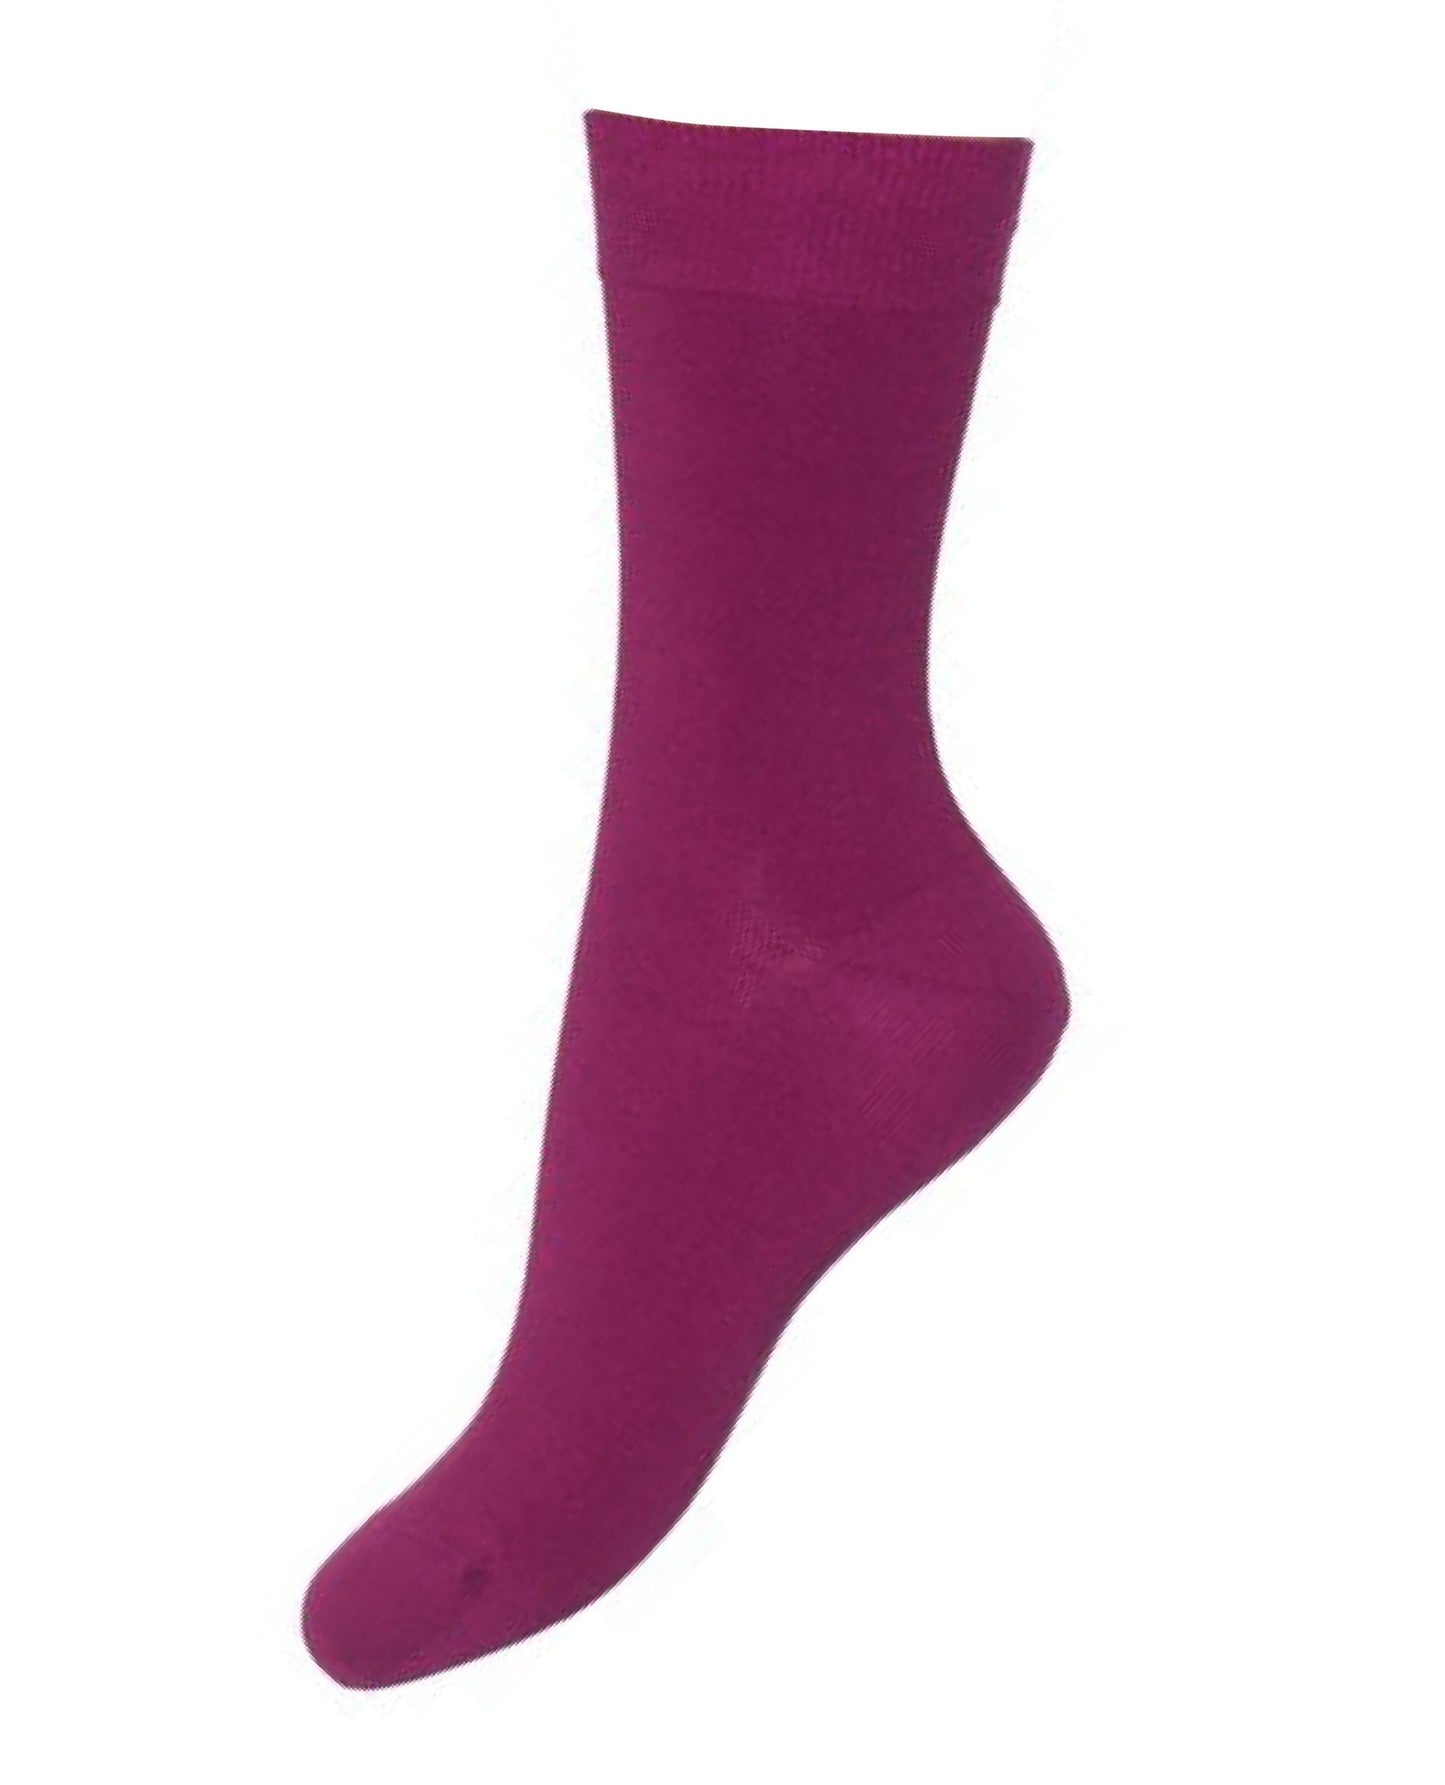 Bonnie Doon 83422 / BD632401 Cotton Sock - dark pink (berry) ankle socks available in men and women sizes